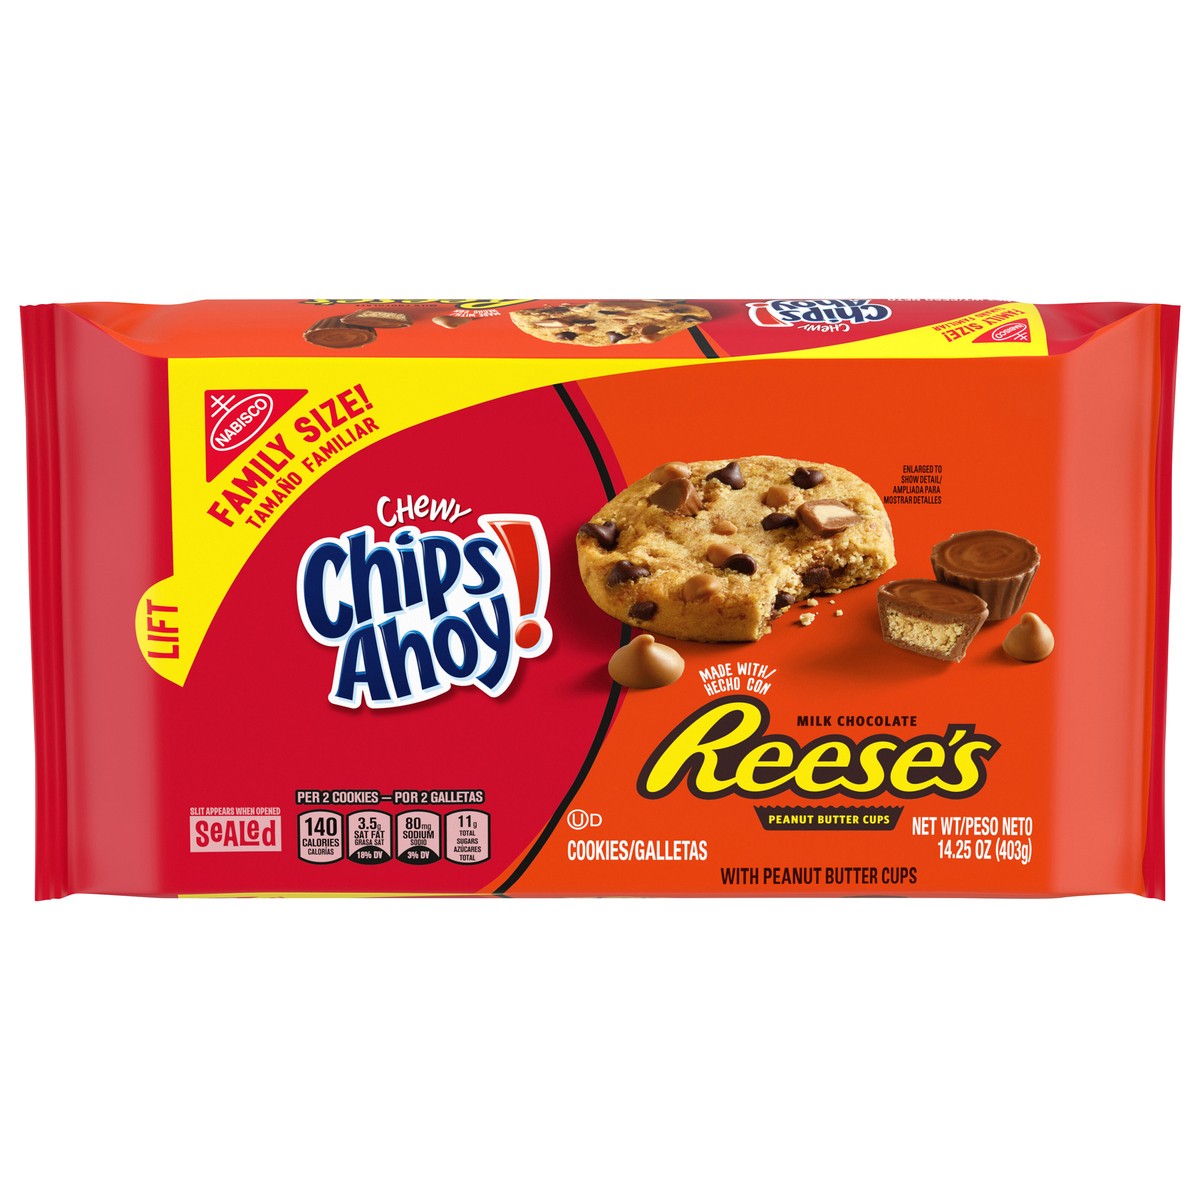 slide 1 of 15, CHIPS AHOY! Chewy Chocolate Chip Cookies with Reese's Peanut Butter Cups, Family Size, 14.25 oz, 14.25 oz